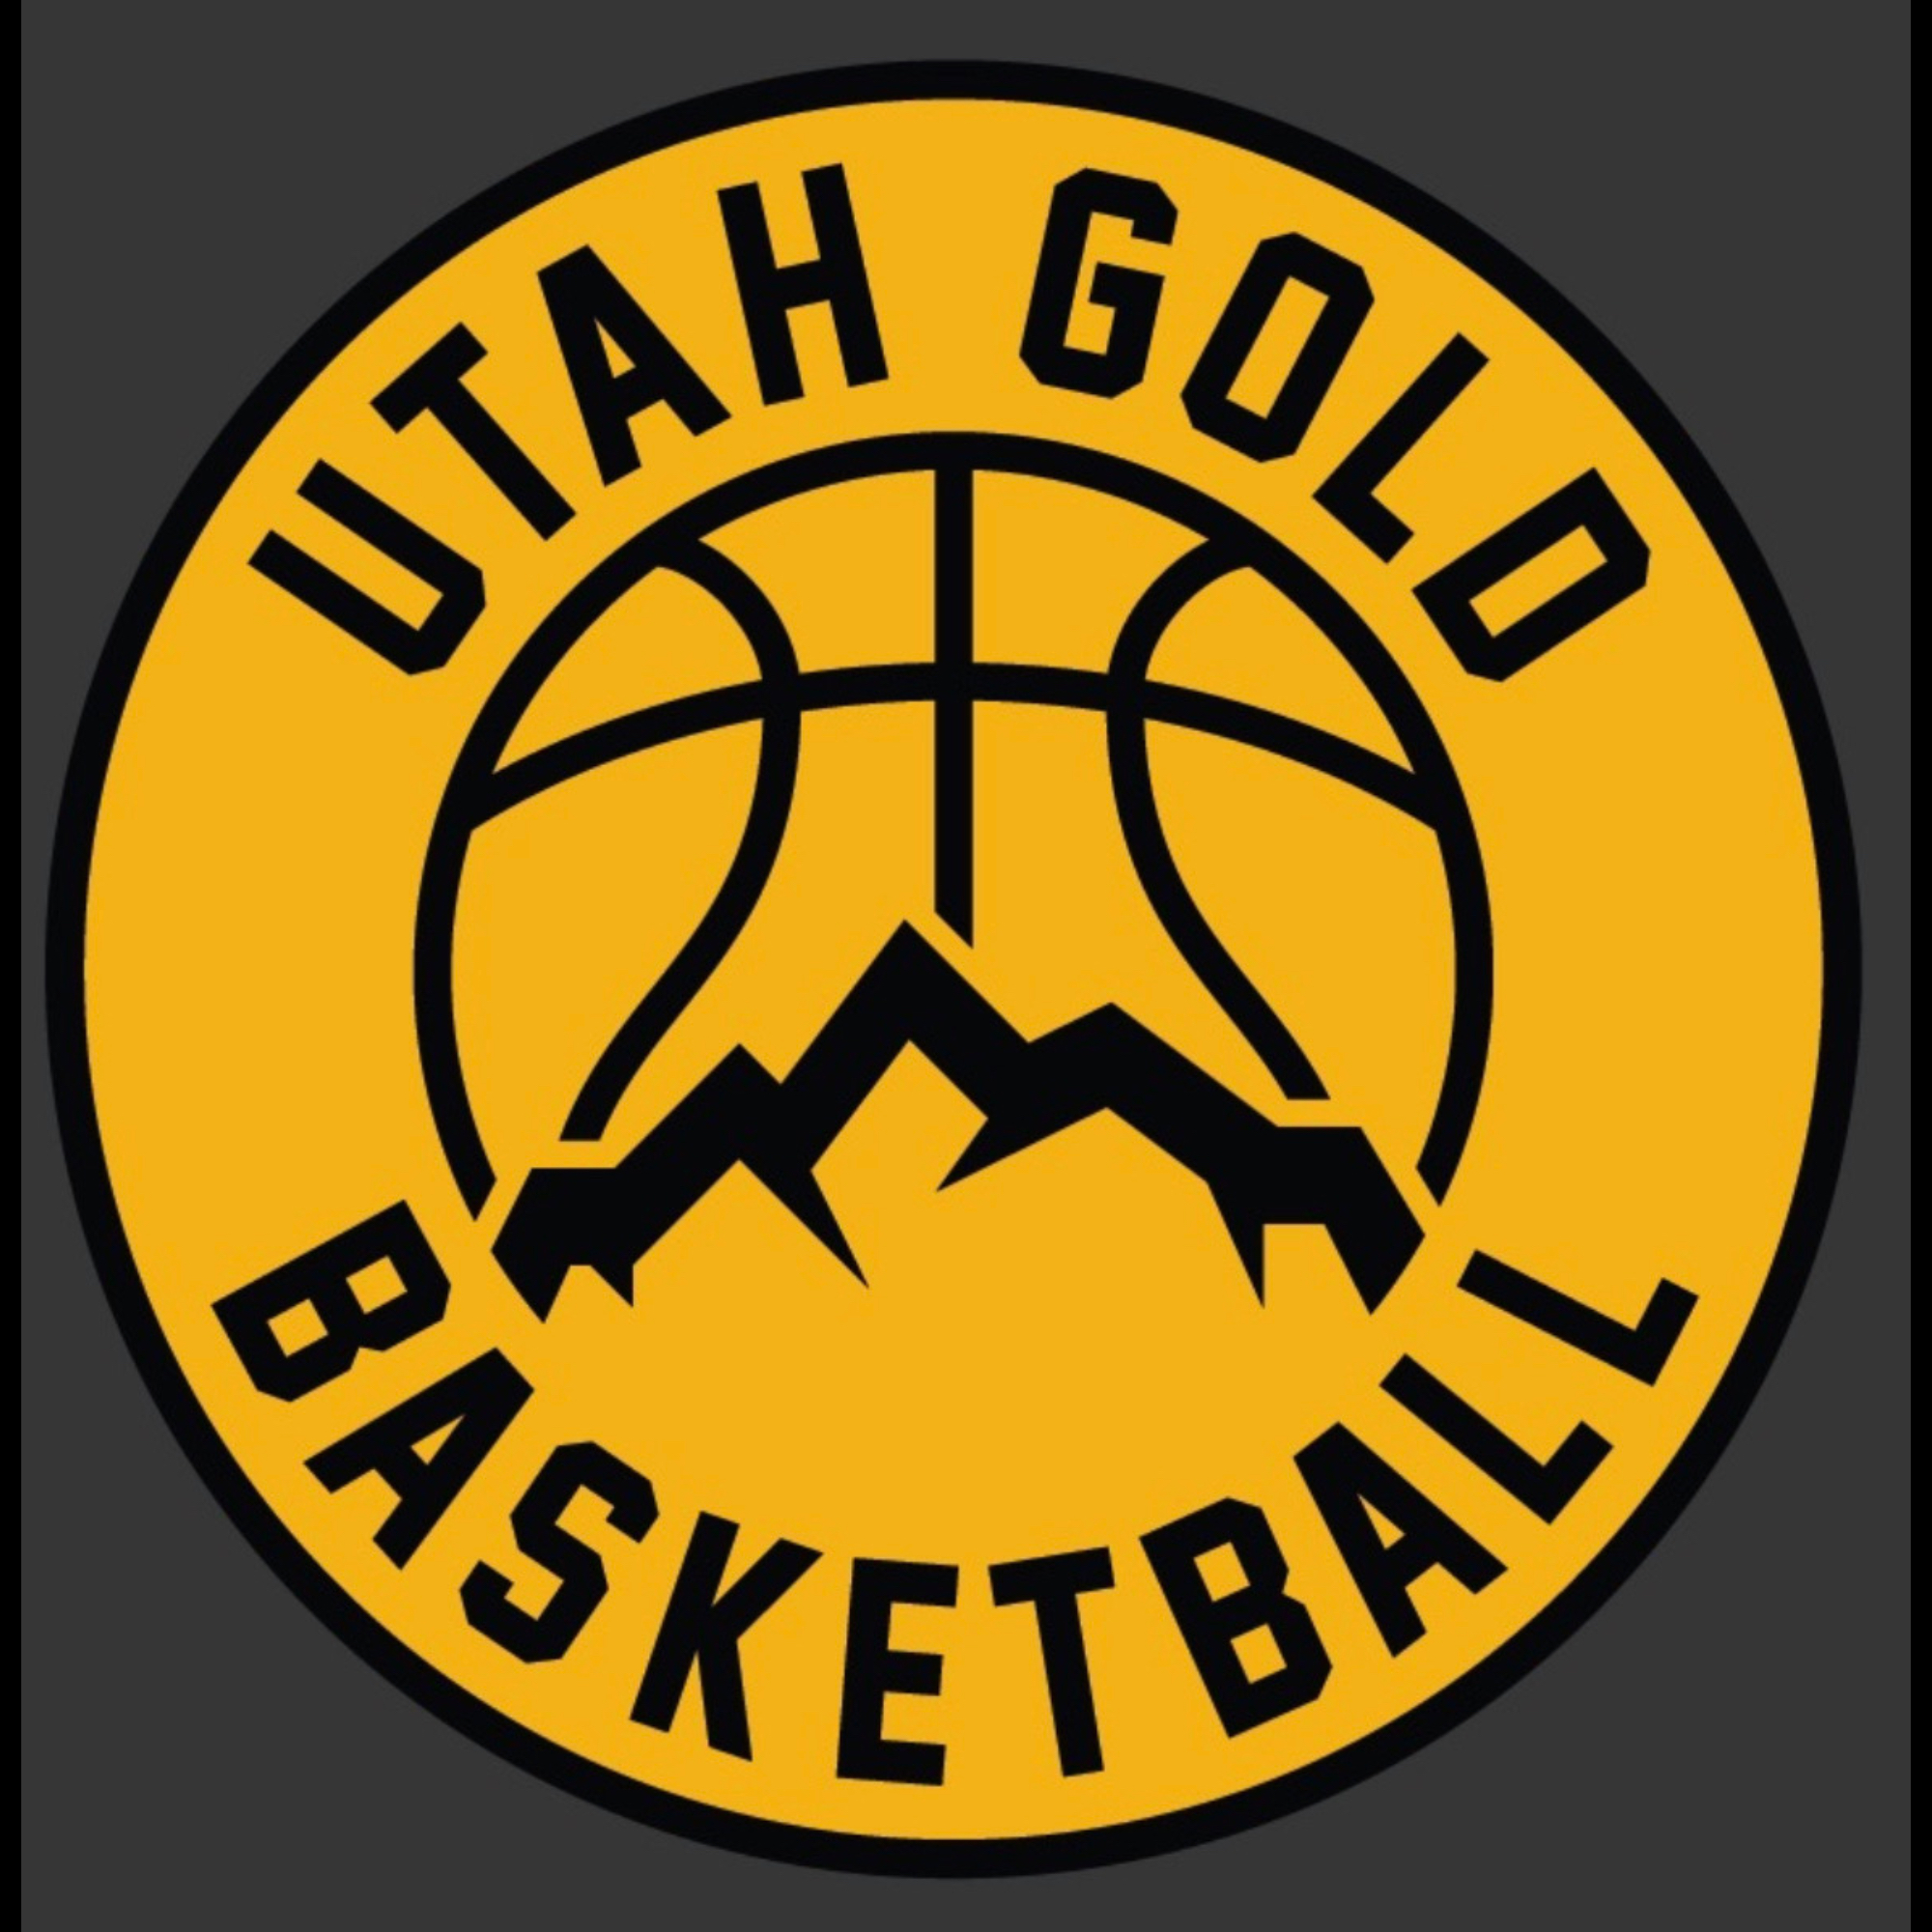 The official logo of UtahGold